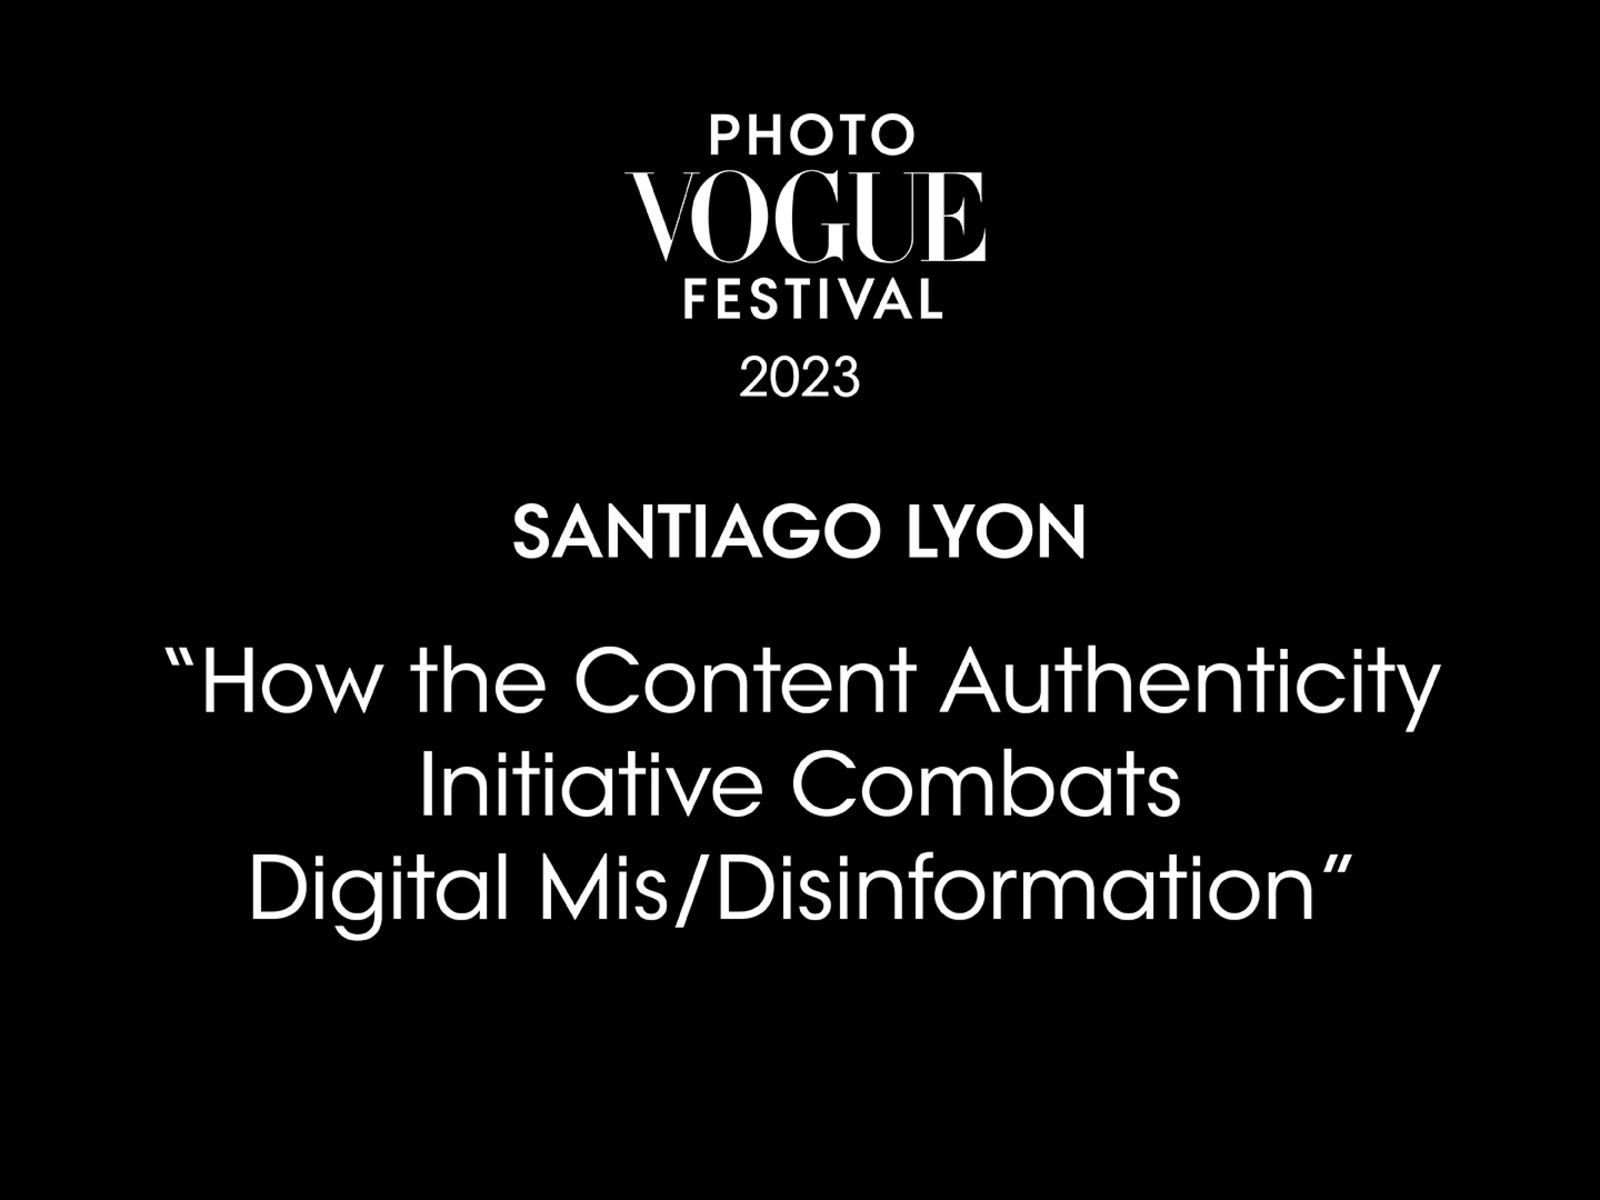 How the Content Authenticity Initiative Combats Digital Mis/Disinformation | PhotoVogue Festival 2023: What Makes Us Human? Image in the Age of A.I.